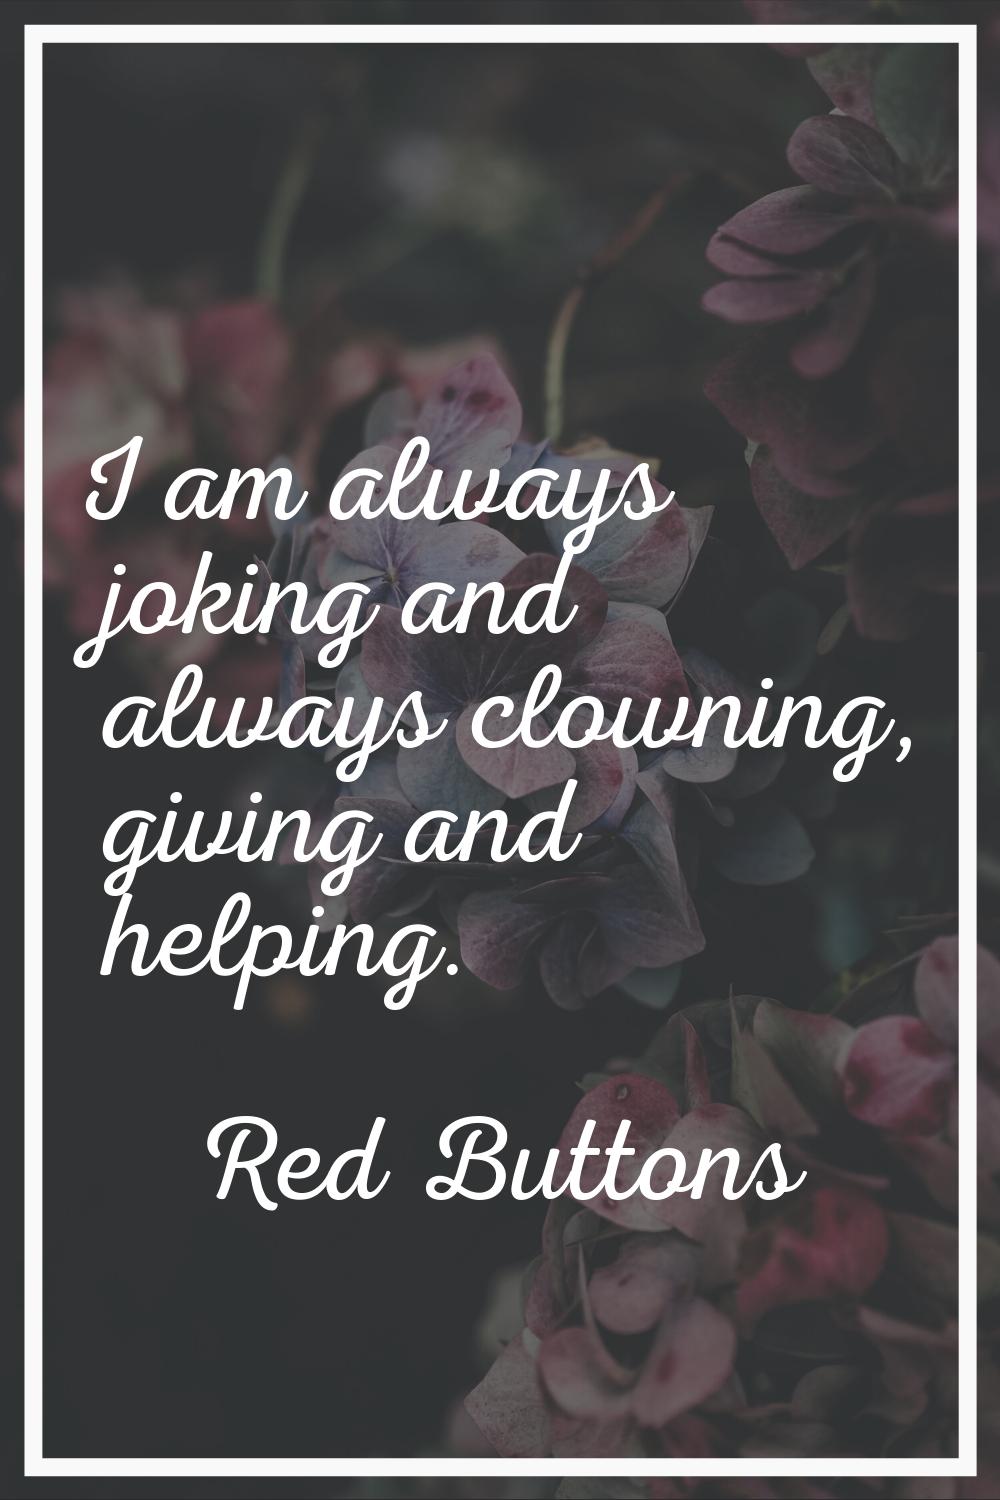 I am always joking and always clowning, giving and helping.